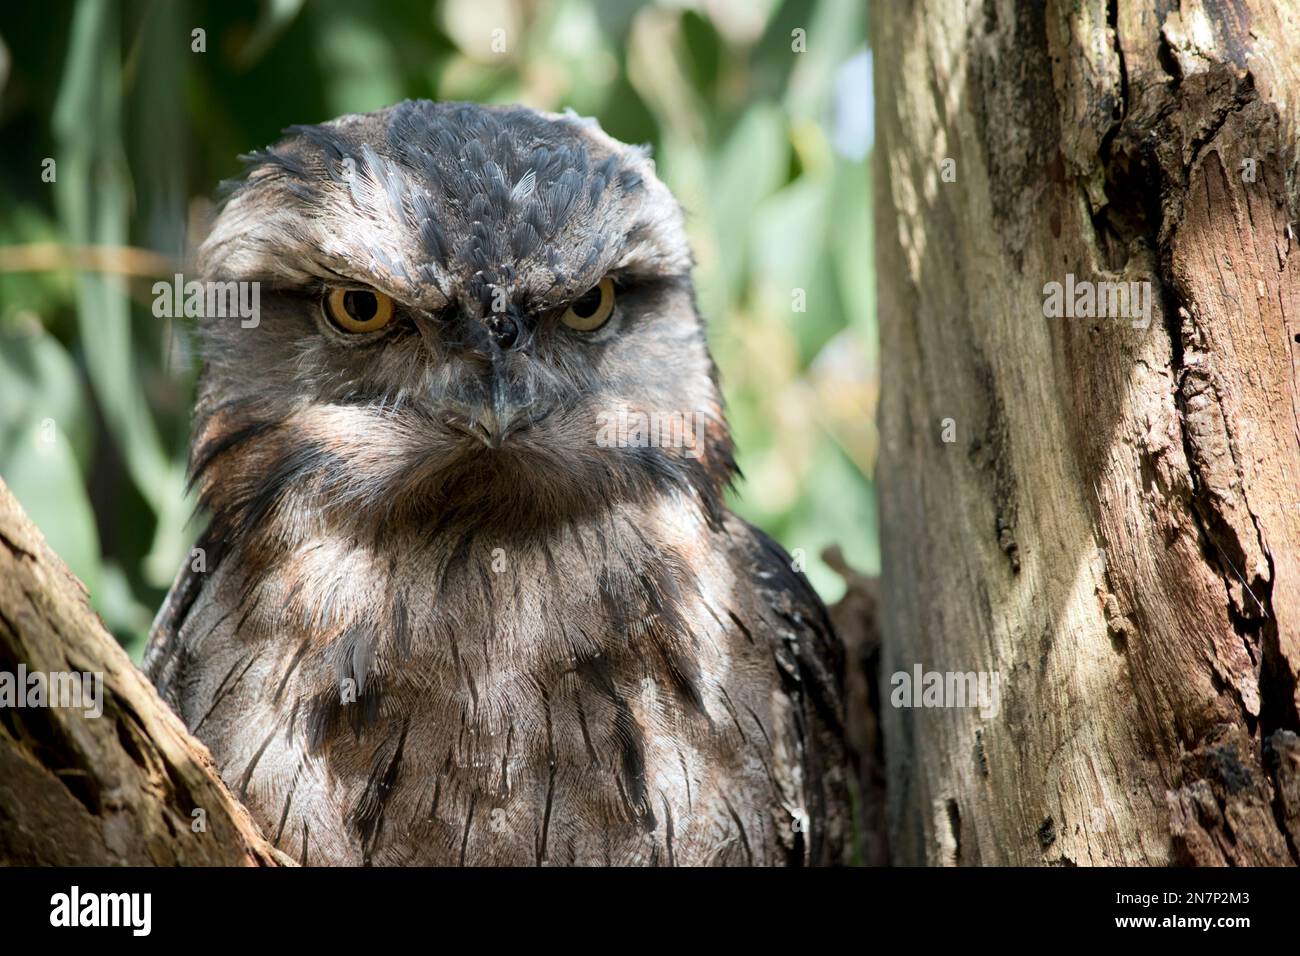 the tawny frogmouth is perched in the fork of a tree Stock Photo